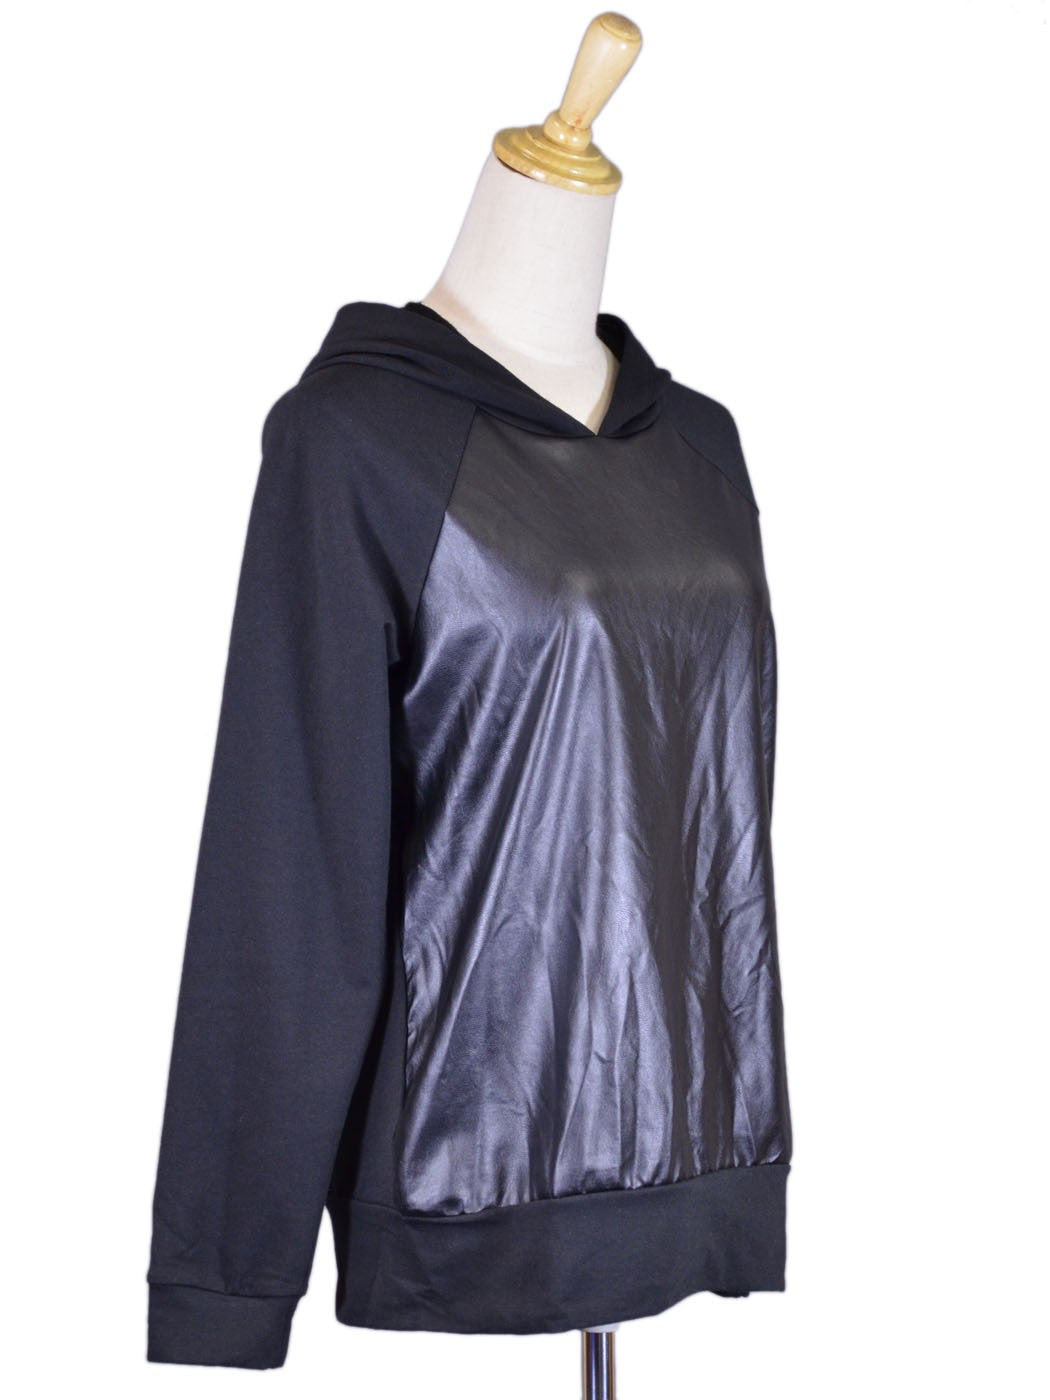 Tresics Brand Black Faux Leather Front and Elbow Patches Sweatshirt